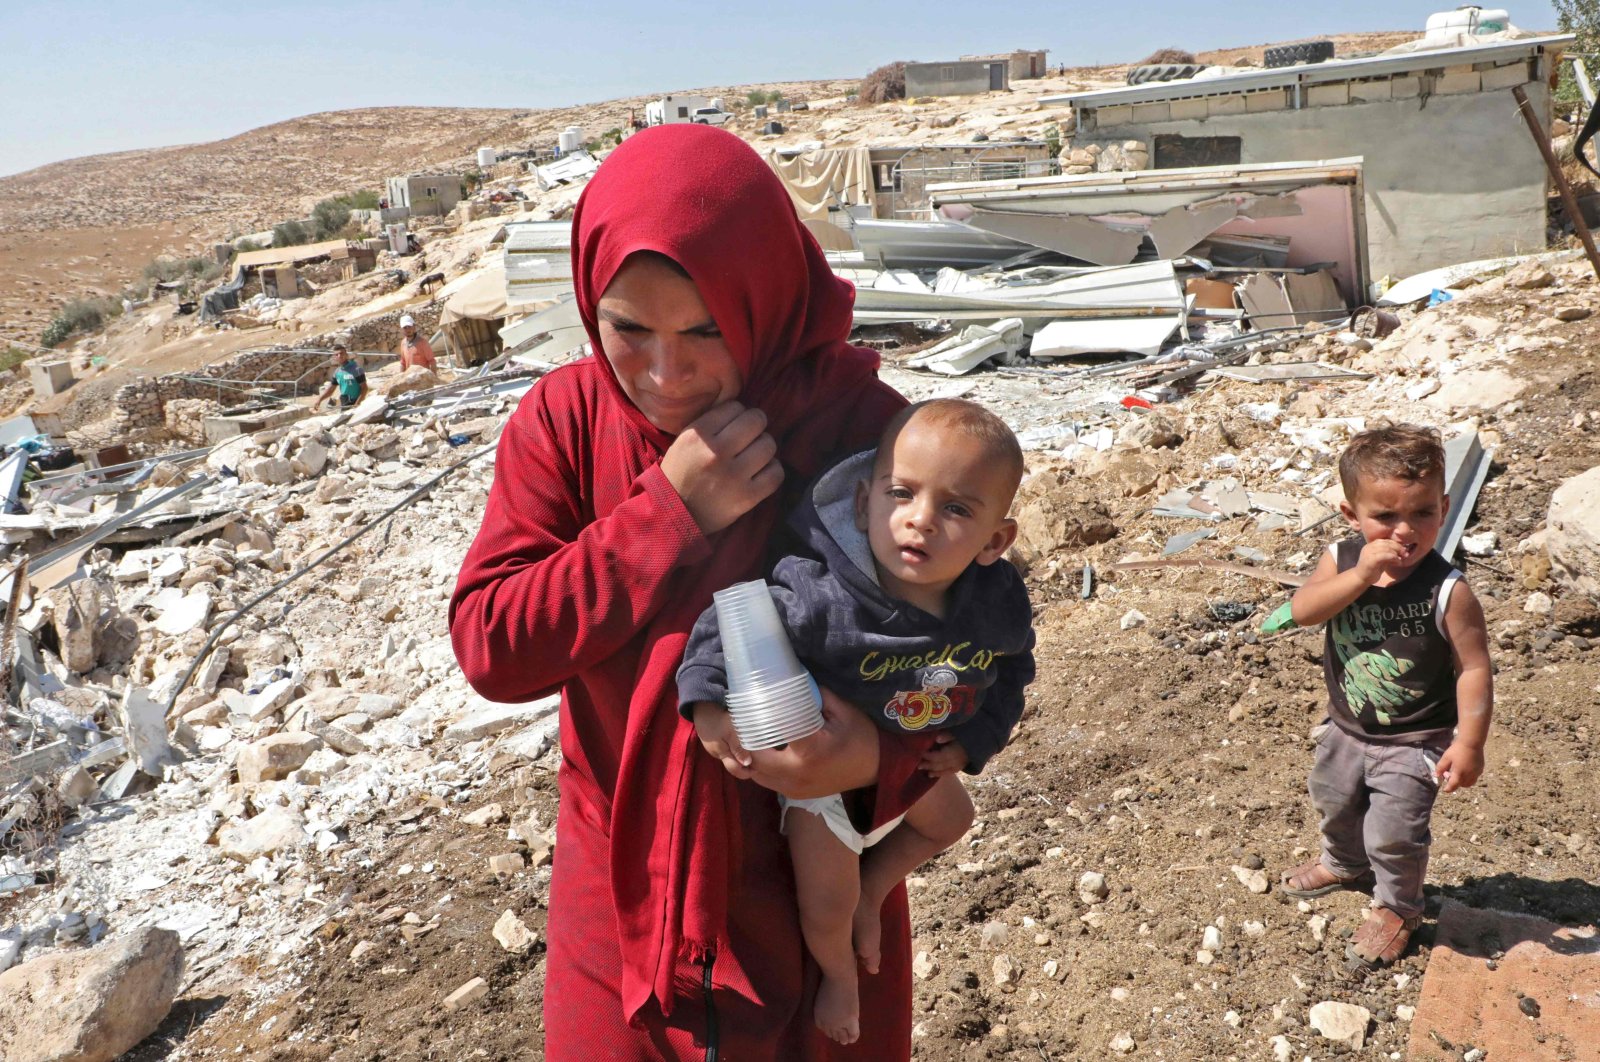 A Palestinian woman walks carrying a baby past wreckage of mobile homes built with European Union funding and destroyed by Israeli forces in the village of Mufagara south of Yatta near Hebron, as they were purportedly built without Israeli authorization, occupied West Bank, Sept. 11, 2019. (AFP Photo)